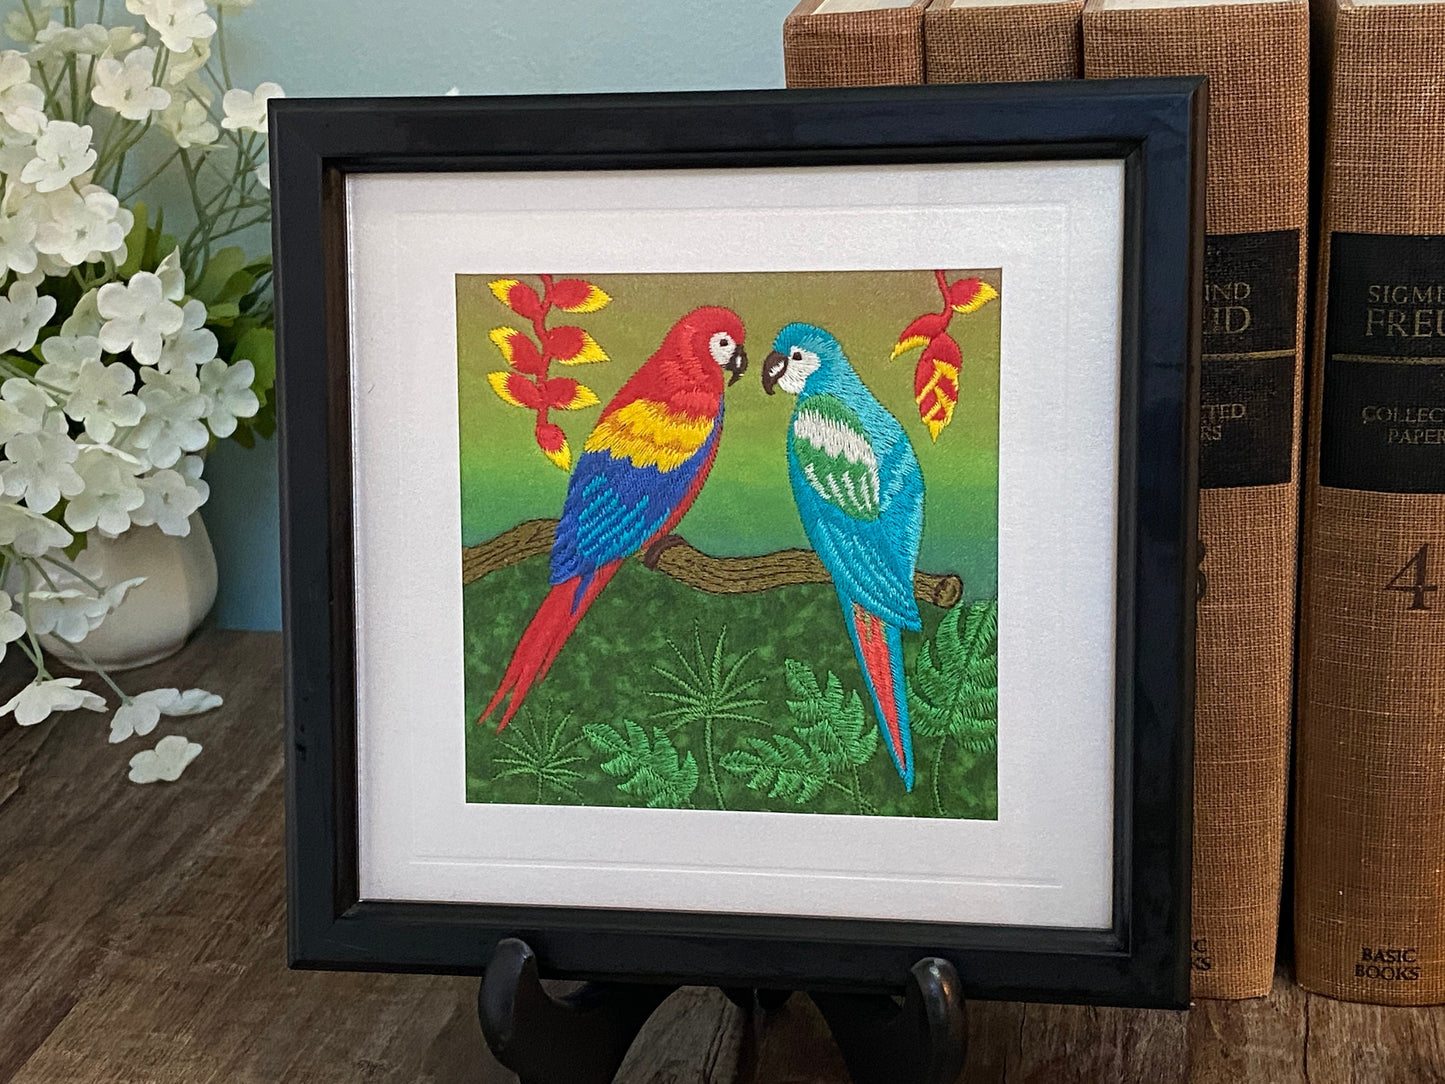 Vintage Framed Embroidered Tropical Bird Wall Art Home Decor